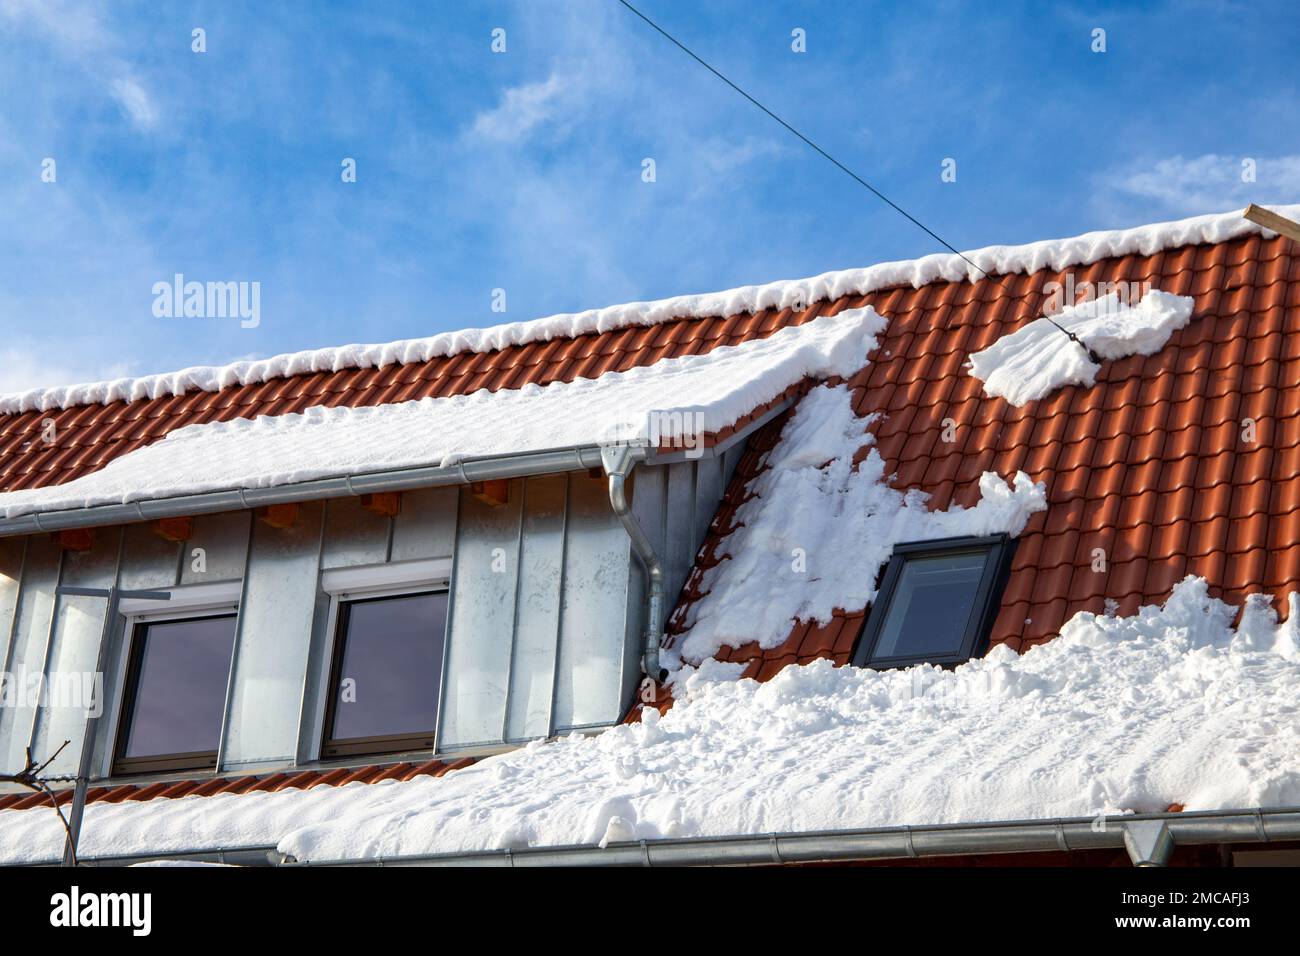 Symbol image of roof avalanche: Snow sliding down the tiled roof of a residential building Stock Photo